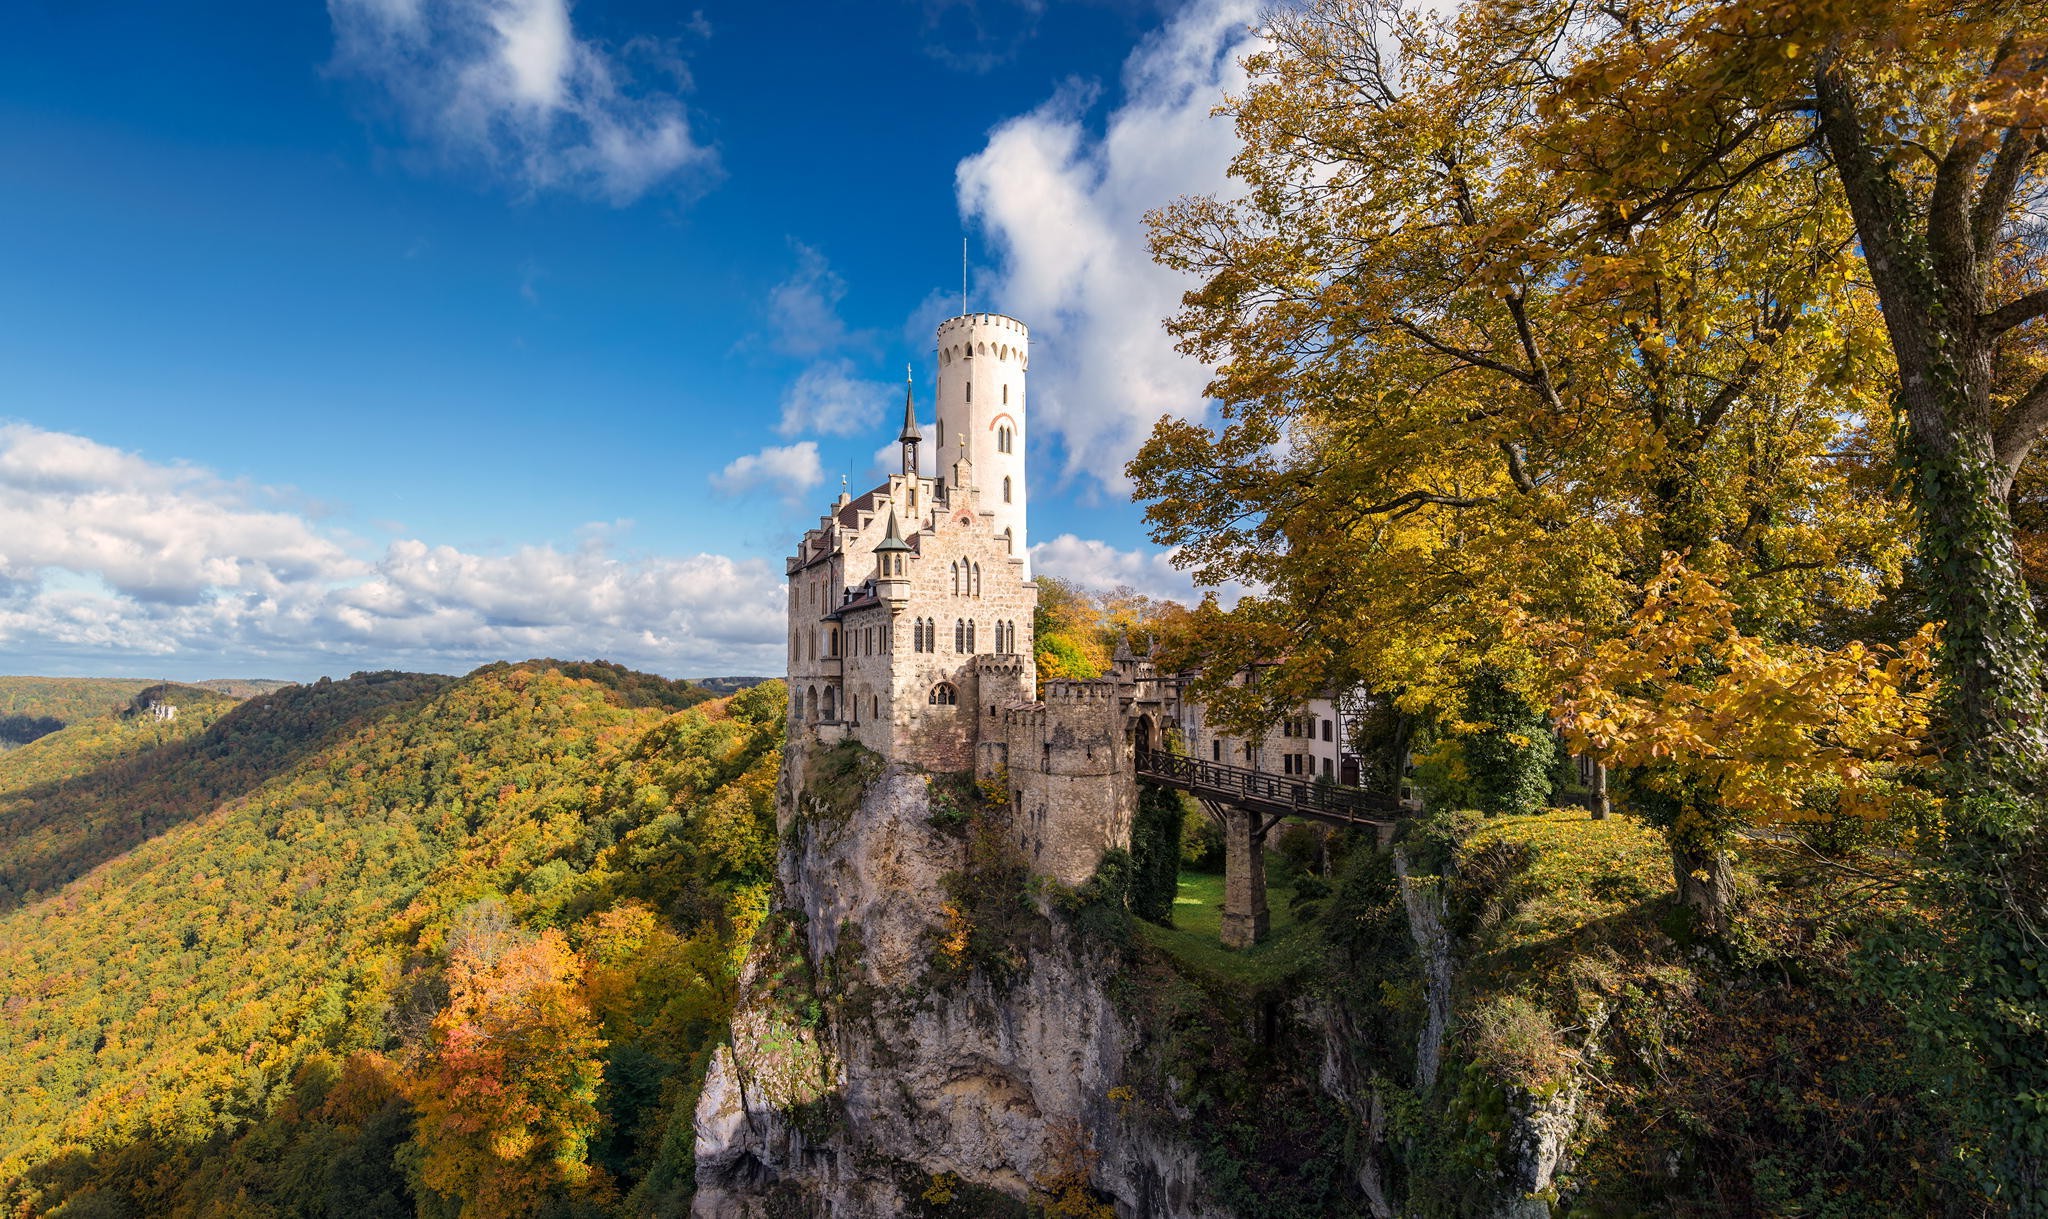 nature, Landscape, Architecture, Trees, Rock, Castle, Germany, Tower, Bridge, Forest, Fall, Clouds, Old Building Wallpaper